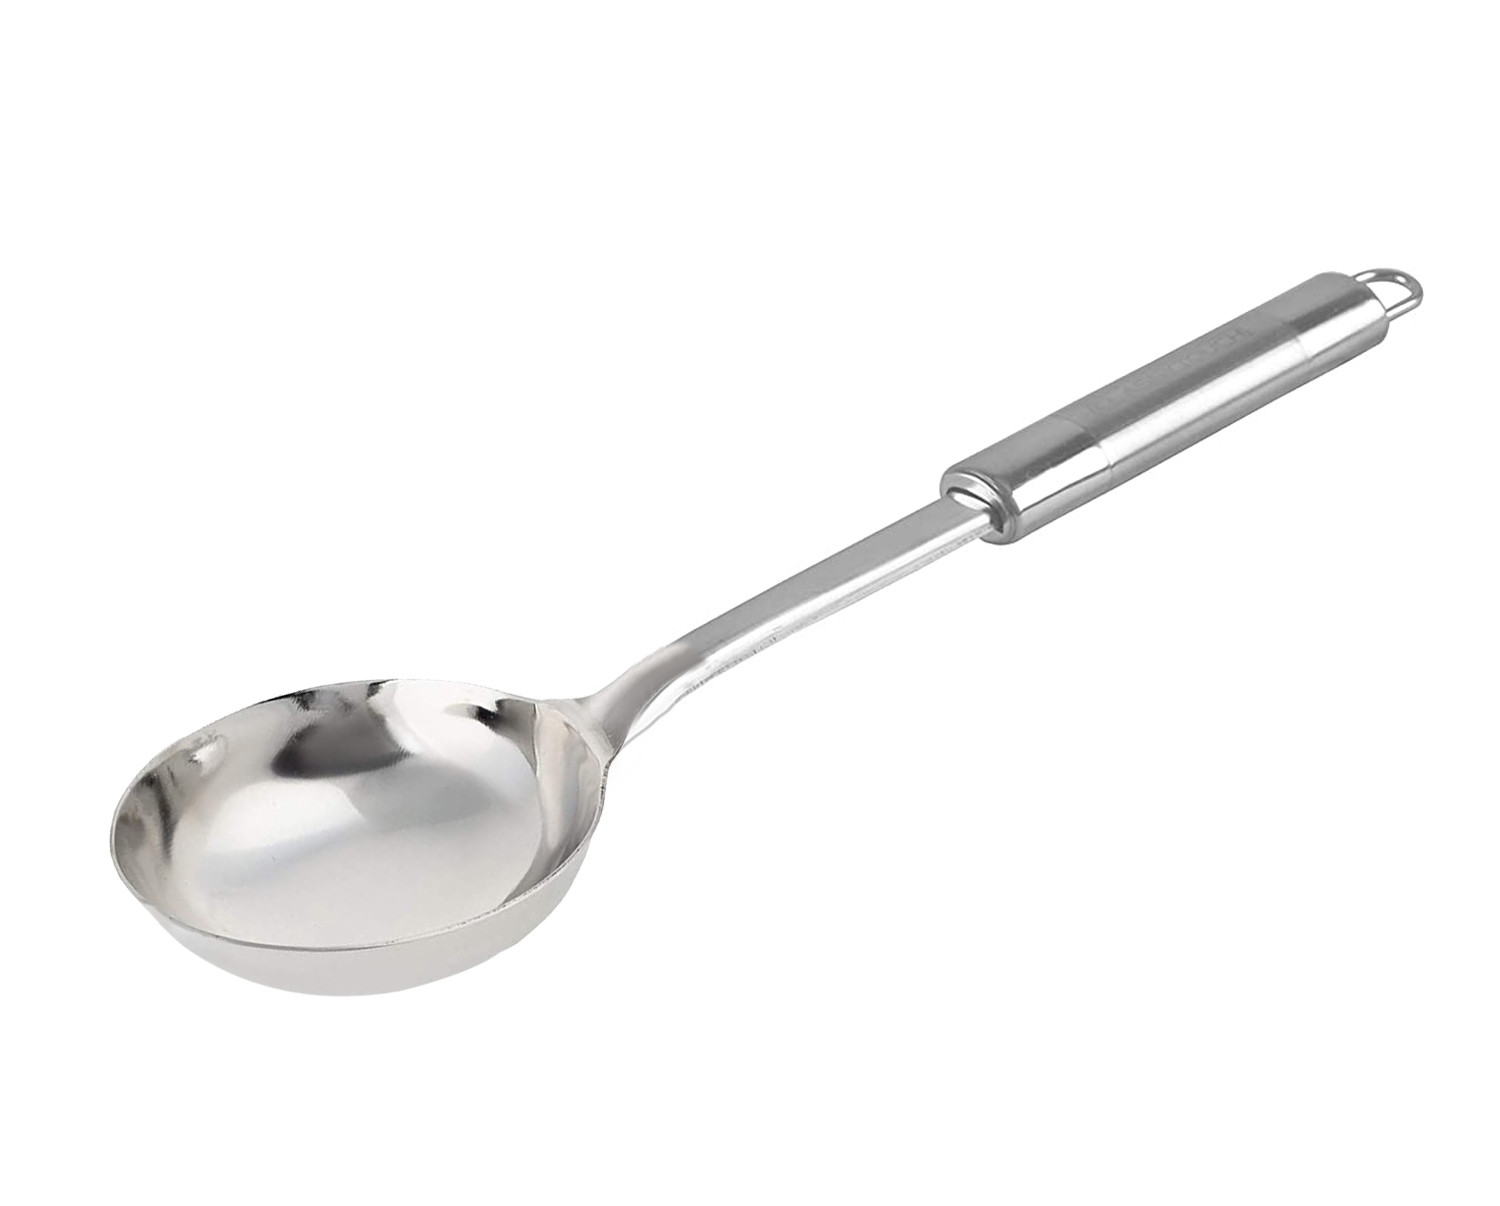 Kuber Industries Stainless Steel Soup Ladle with Long Handle And Ample Bowl Capacity Perfect for Stirring, Serving Soups And More (Silver)